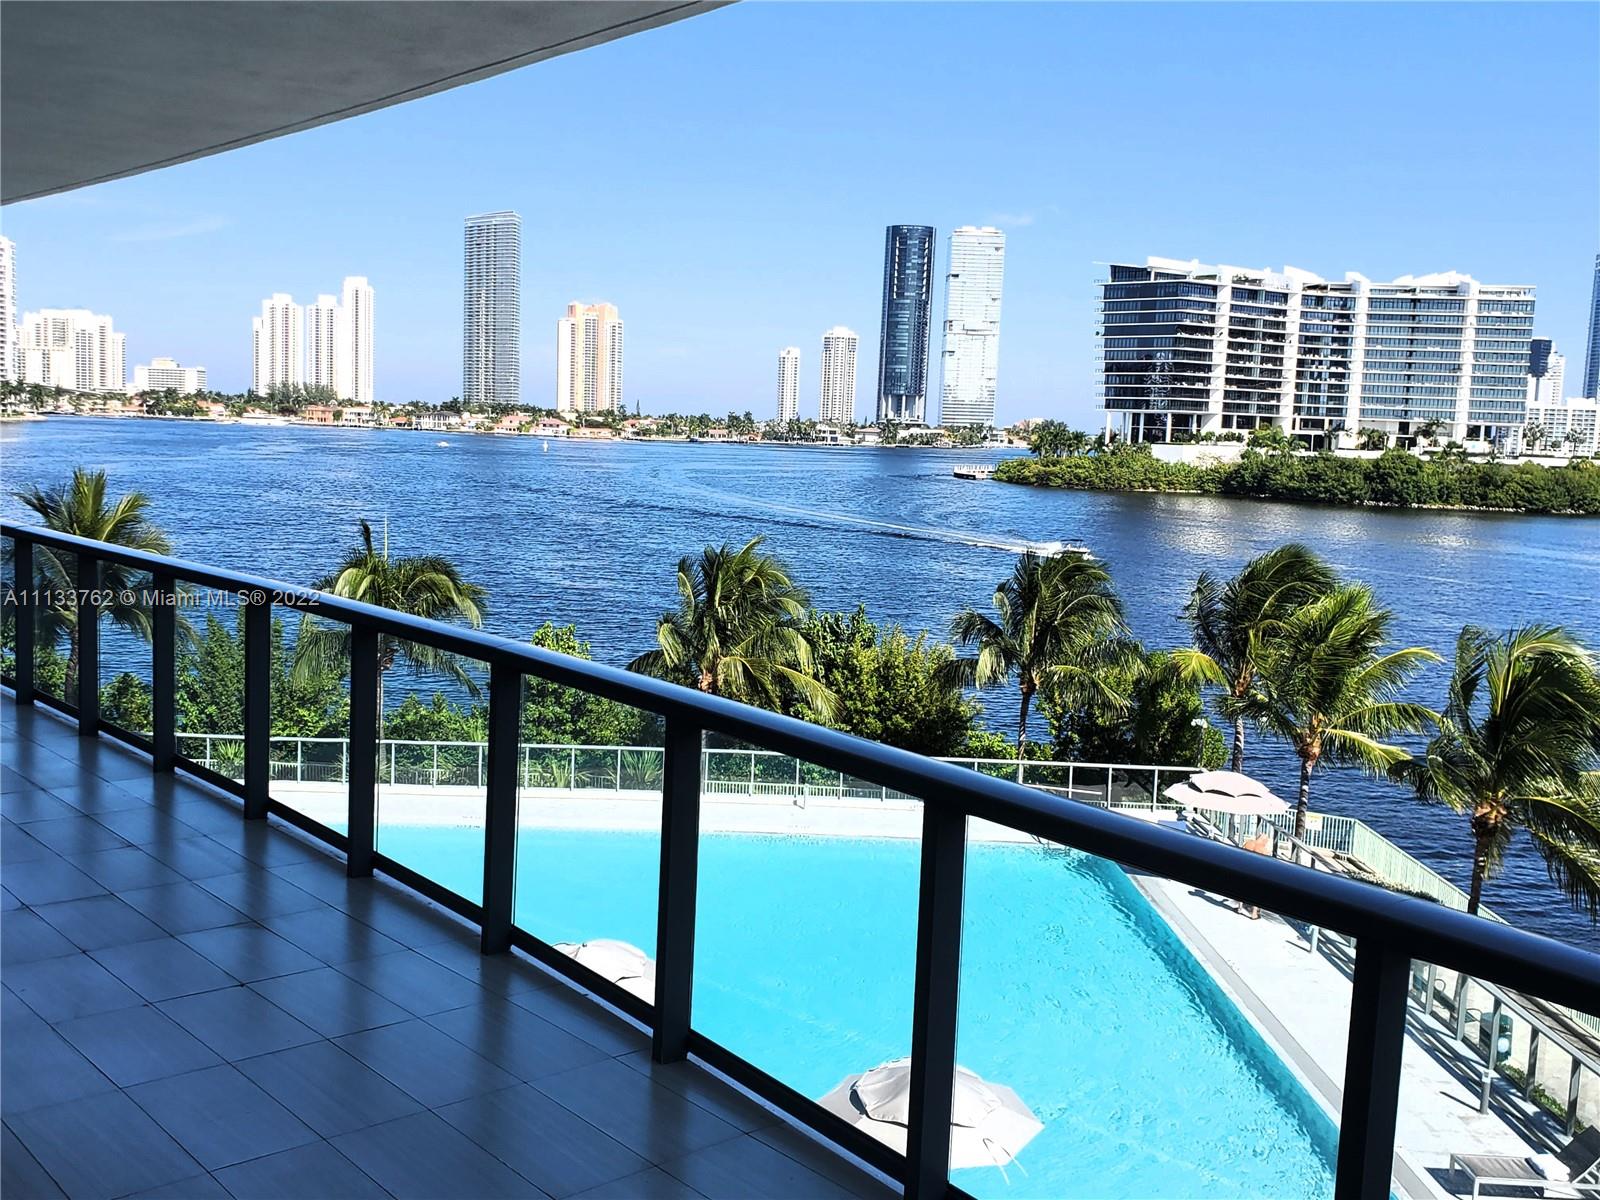 Residence at Echo Aventura furnished. Enjoy endless bay views from this 3Bd/4.5Bth Plus Den residence. Located in the heart of Aventura minutes to everything. Unit has many upgrades and luxurious finishes and furnishings. Enjoy the summer kitchen overlooking the Bay or experience the amazing amenities including state of the art gym, concierge, spa, and exquisite common areas. Perfect to invest. The unit is rented till July 2024.